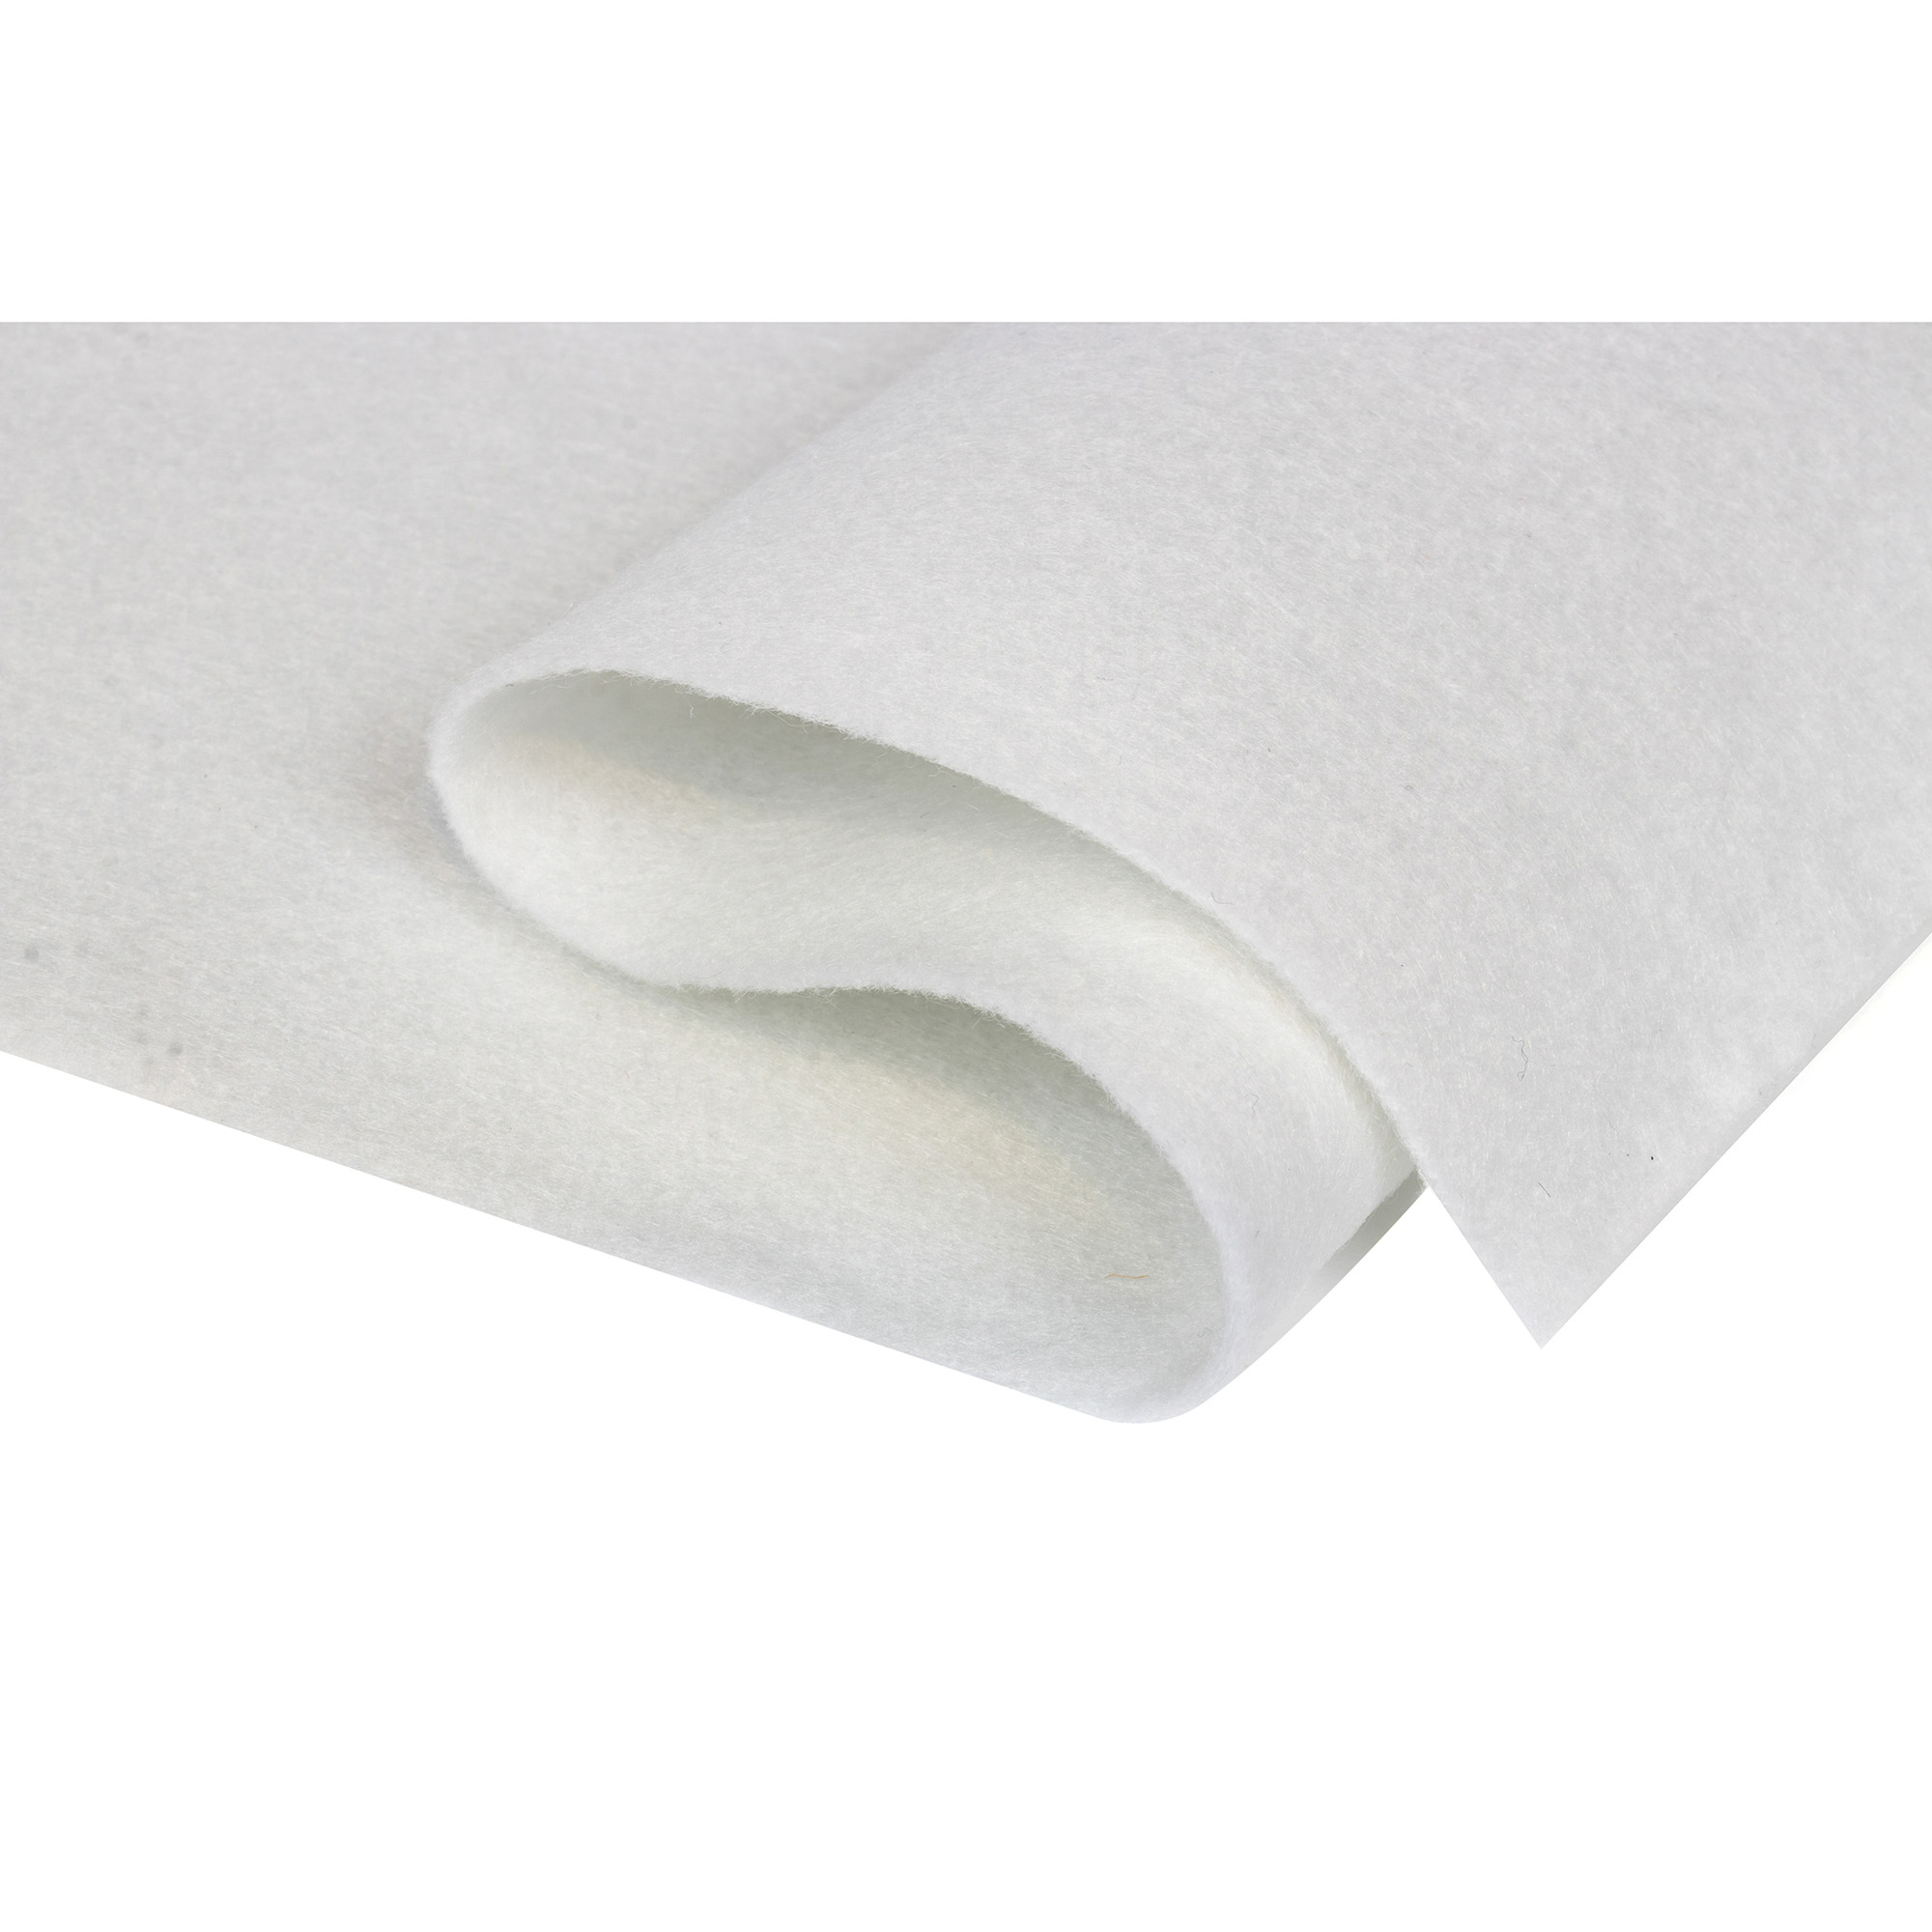 High quality needle punch 100% polyester nonwoven fabric